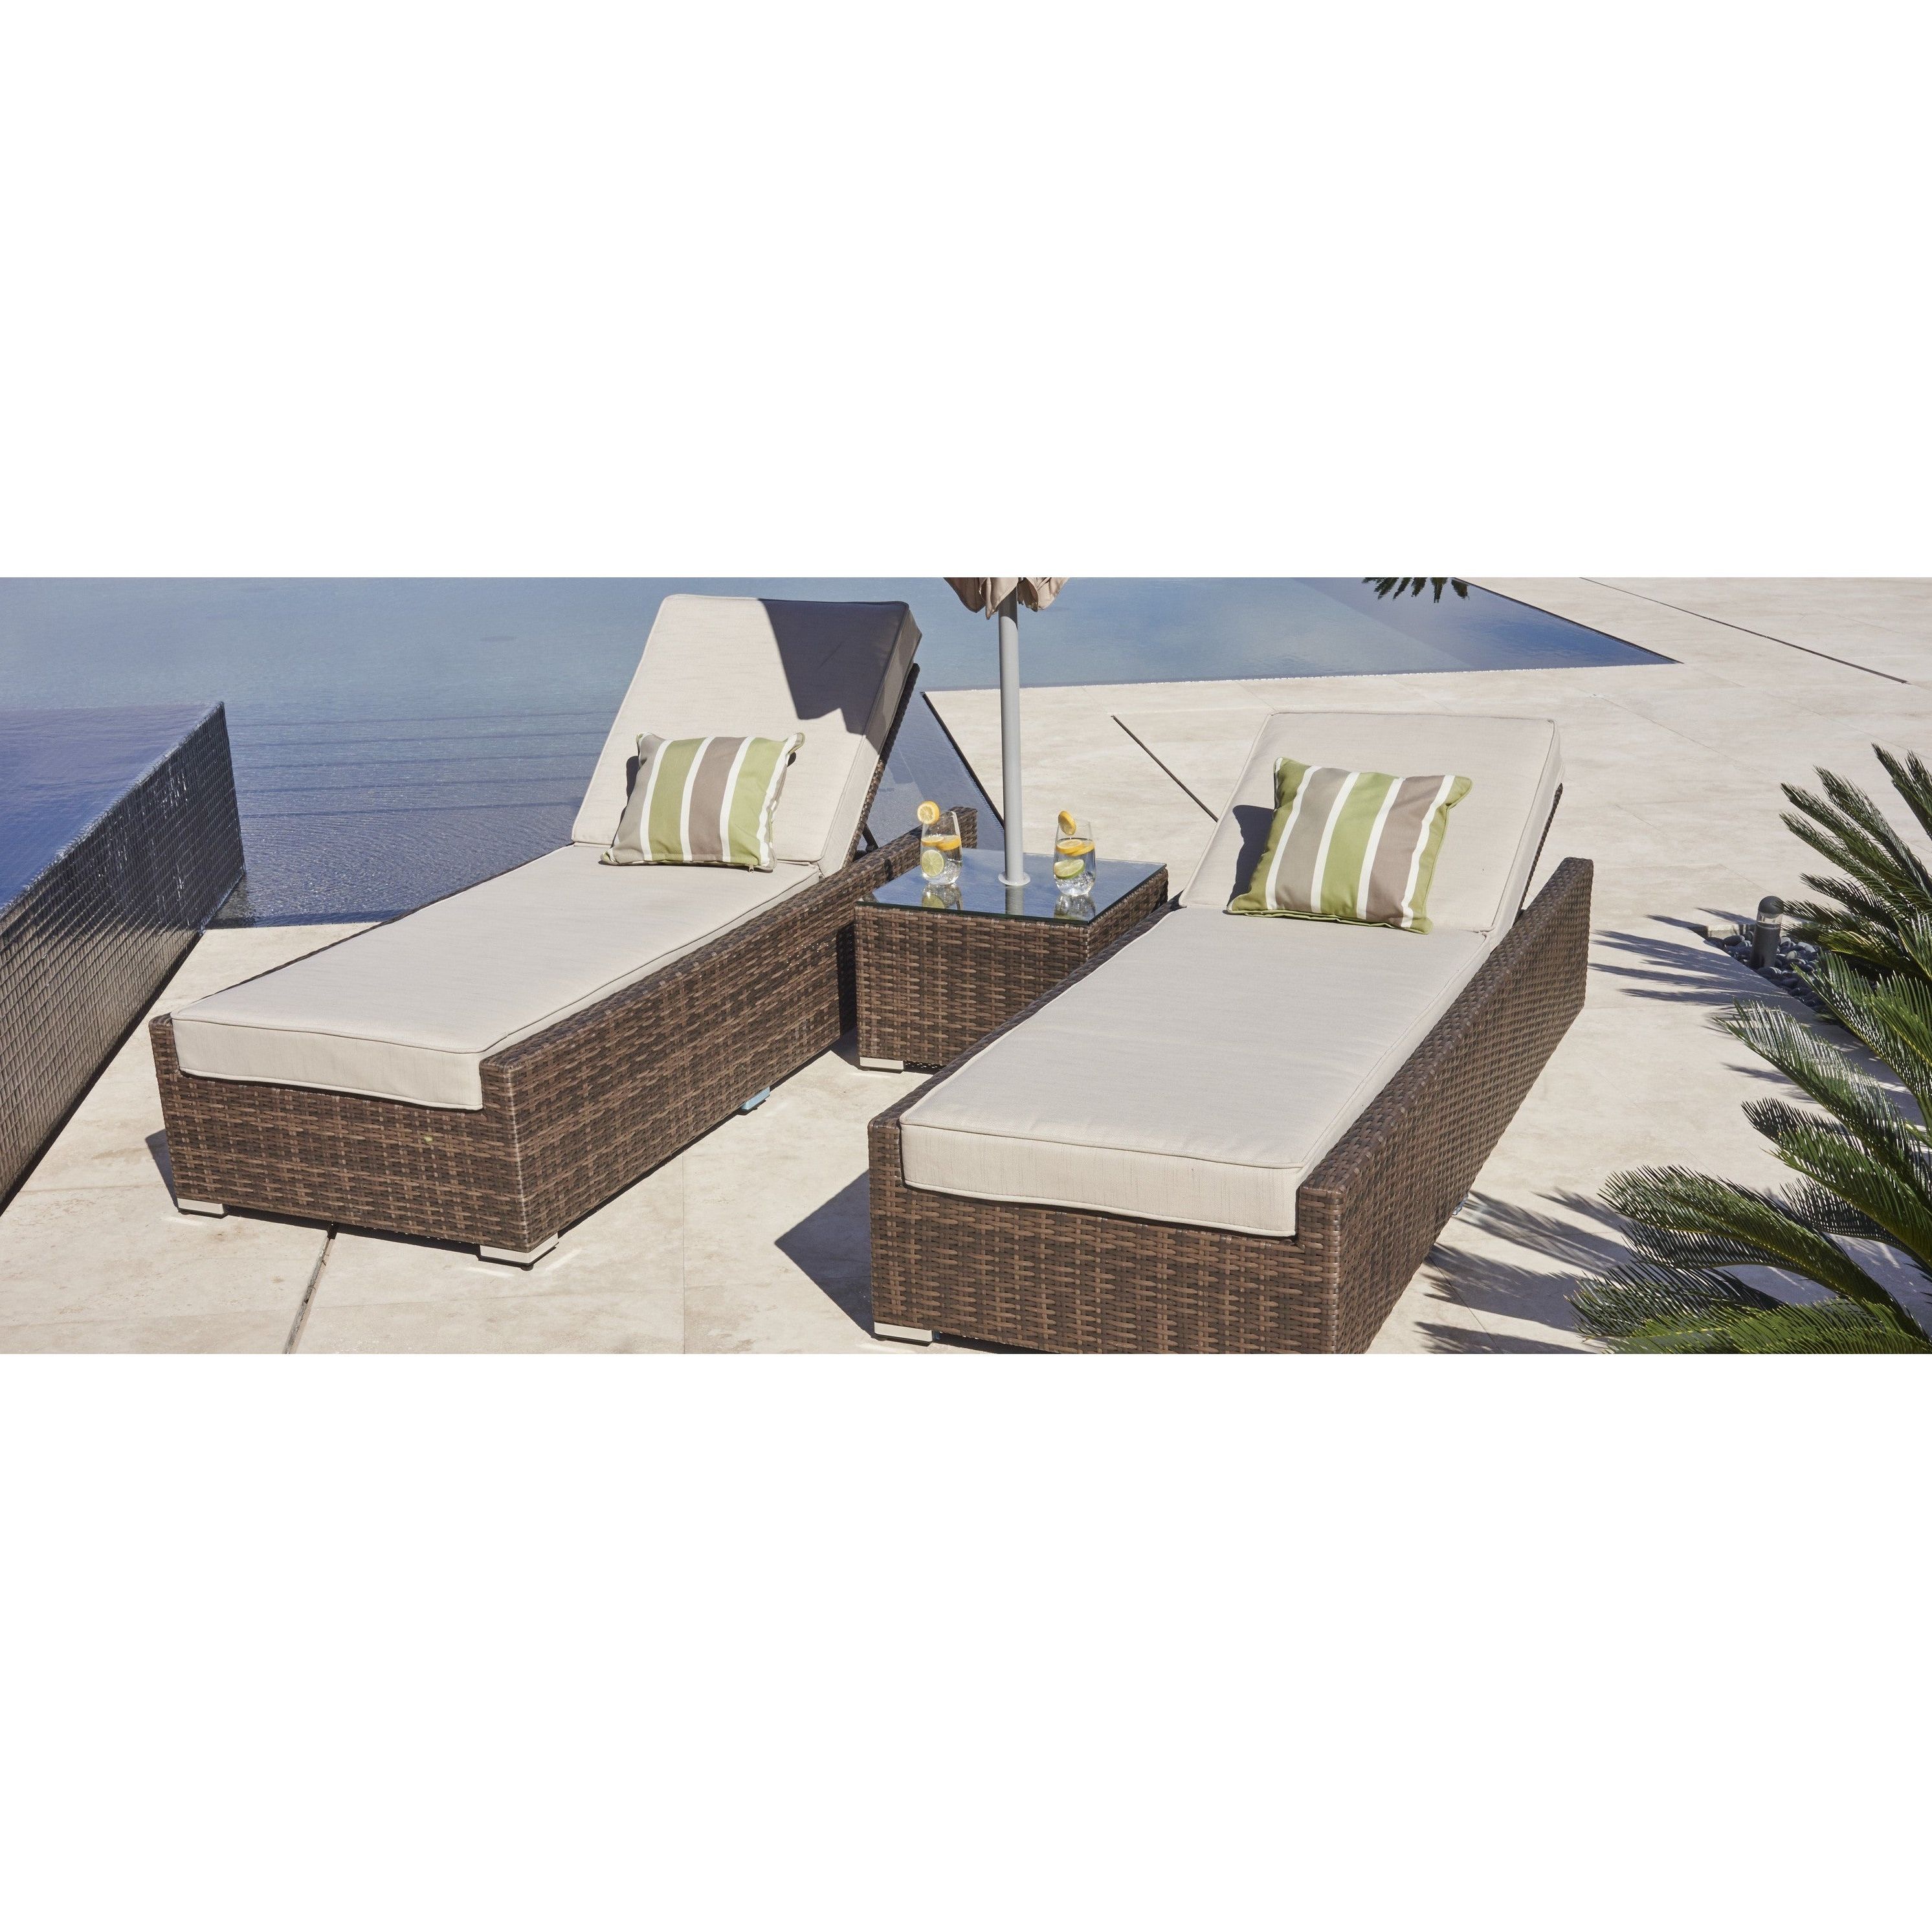 Vida Brown Wicker Outdoor Patio Chaise Lounger Chairs And Side Table (set  Of 3) Within Best And Newest Outdoor 3 Piece Chaise Lounger Sets With Table (View 11 of 25)